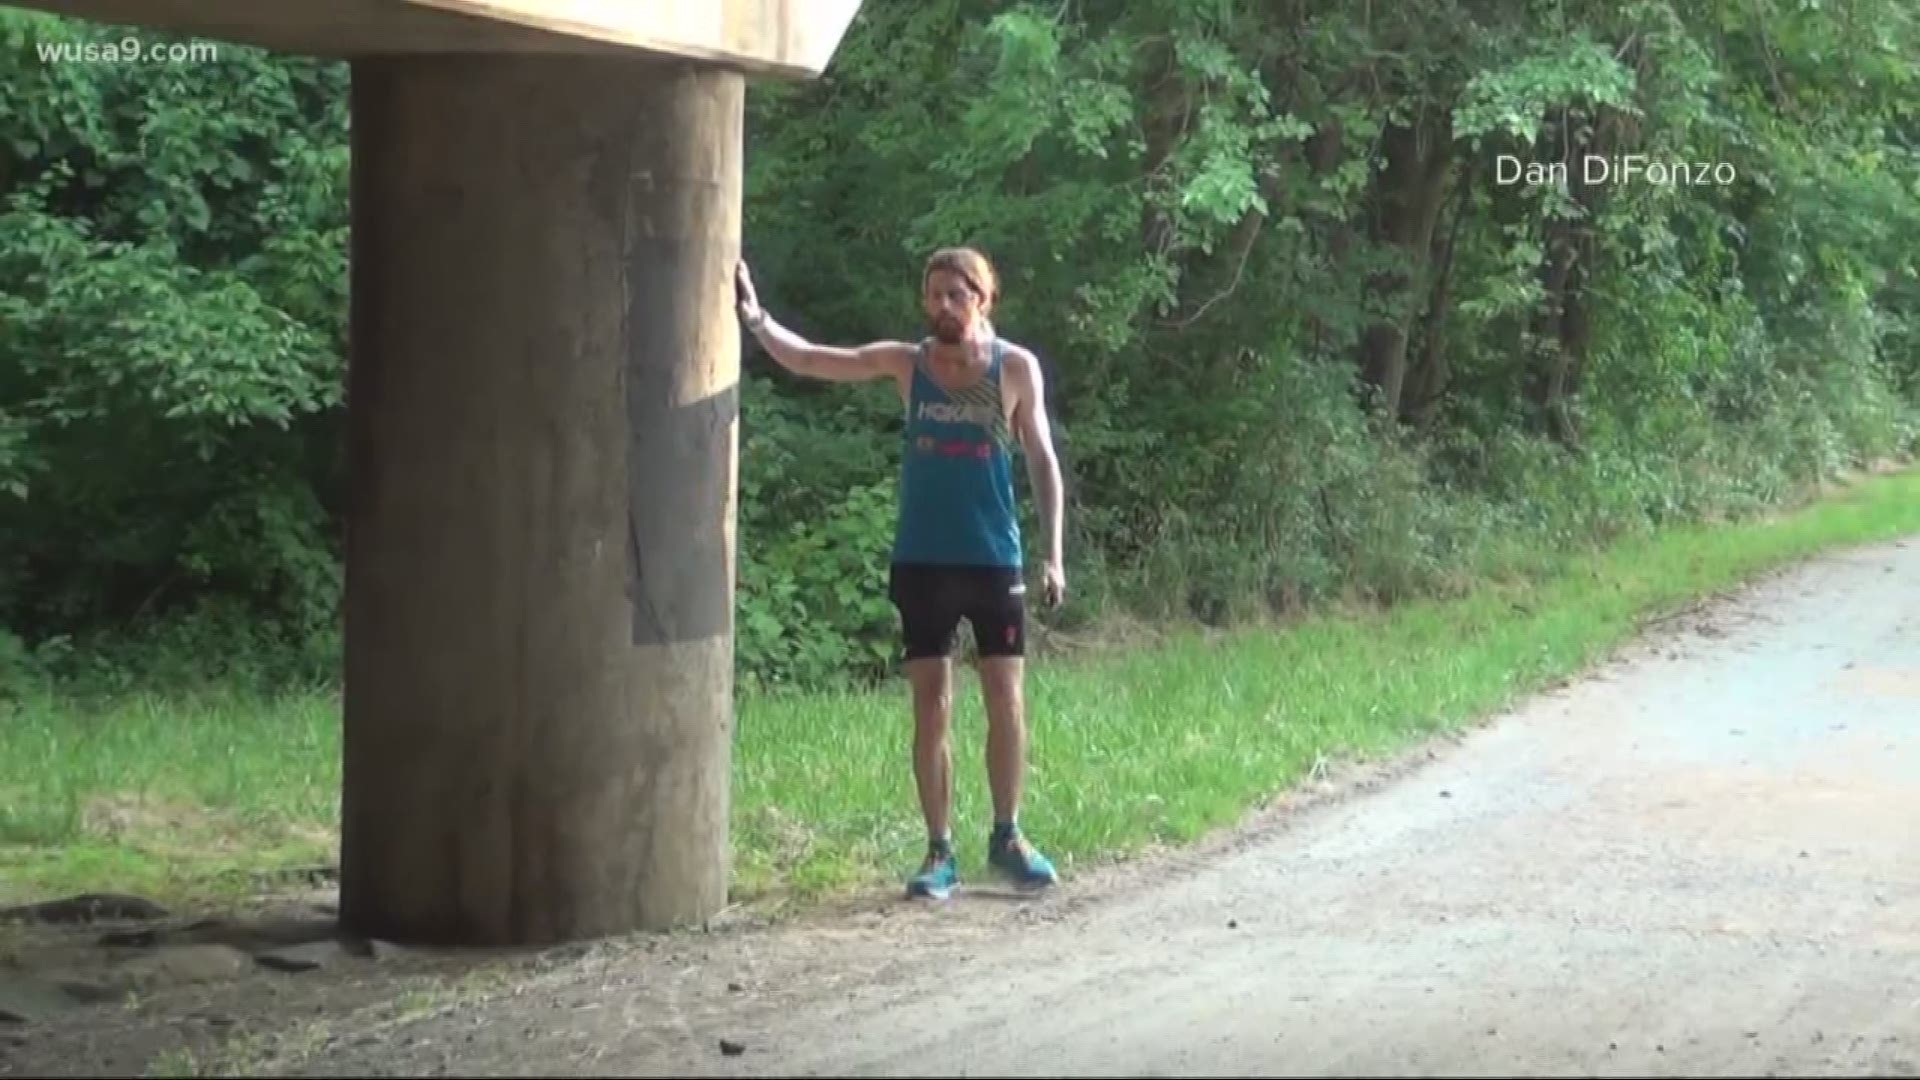 Accomplished ultrarunner Mike Wardian braved the 96-degree heat Saturday to accomplish a childhood dream of running the Beltway.